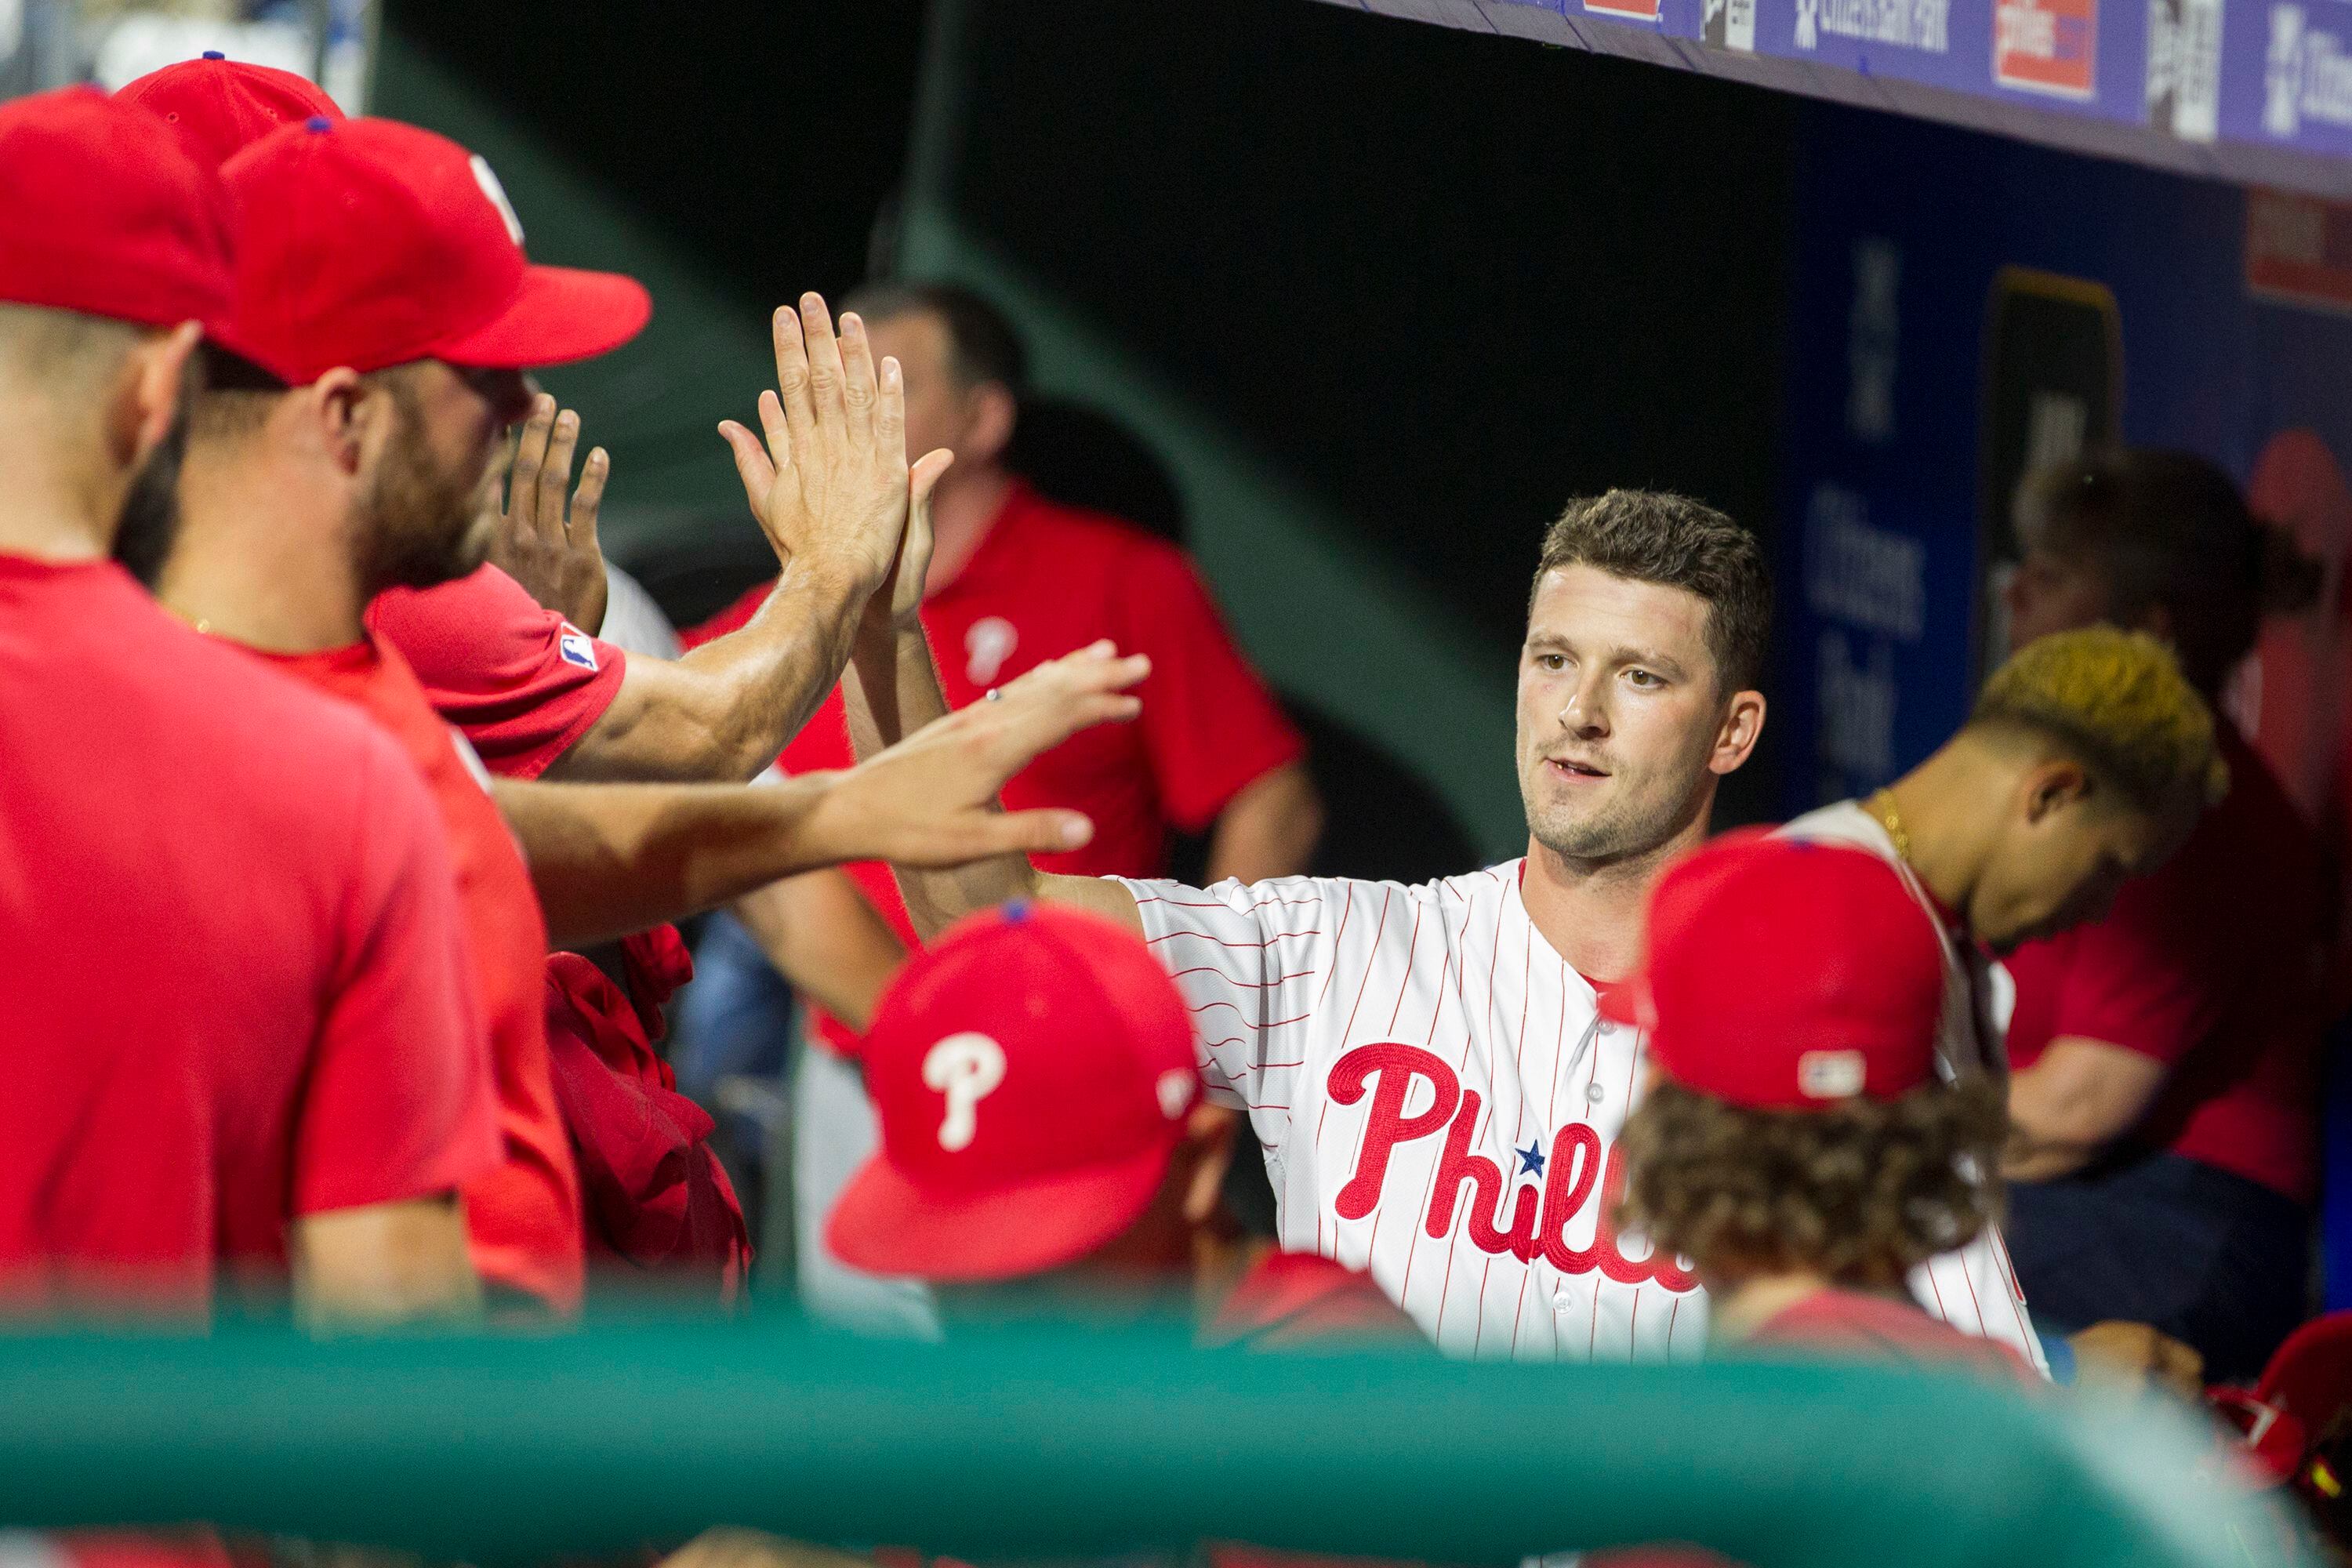 Drew Smyly tosses a gem to lift Phillies over Giants in series opener